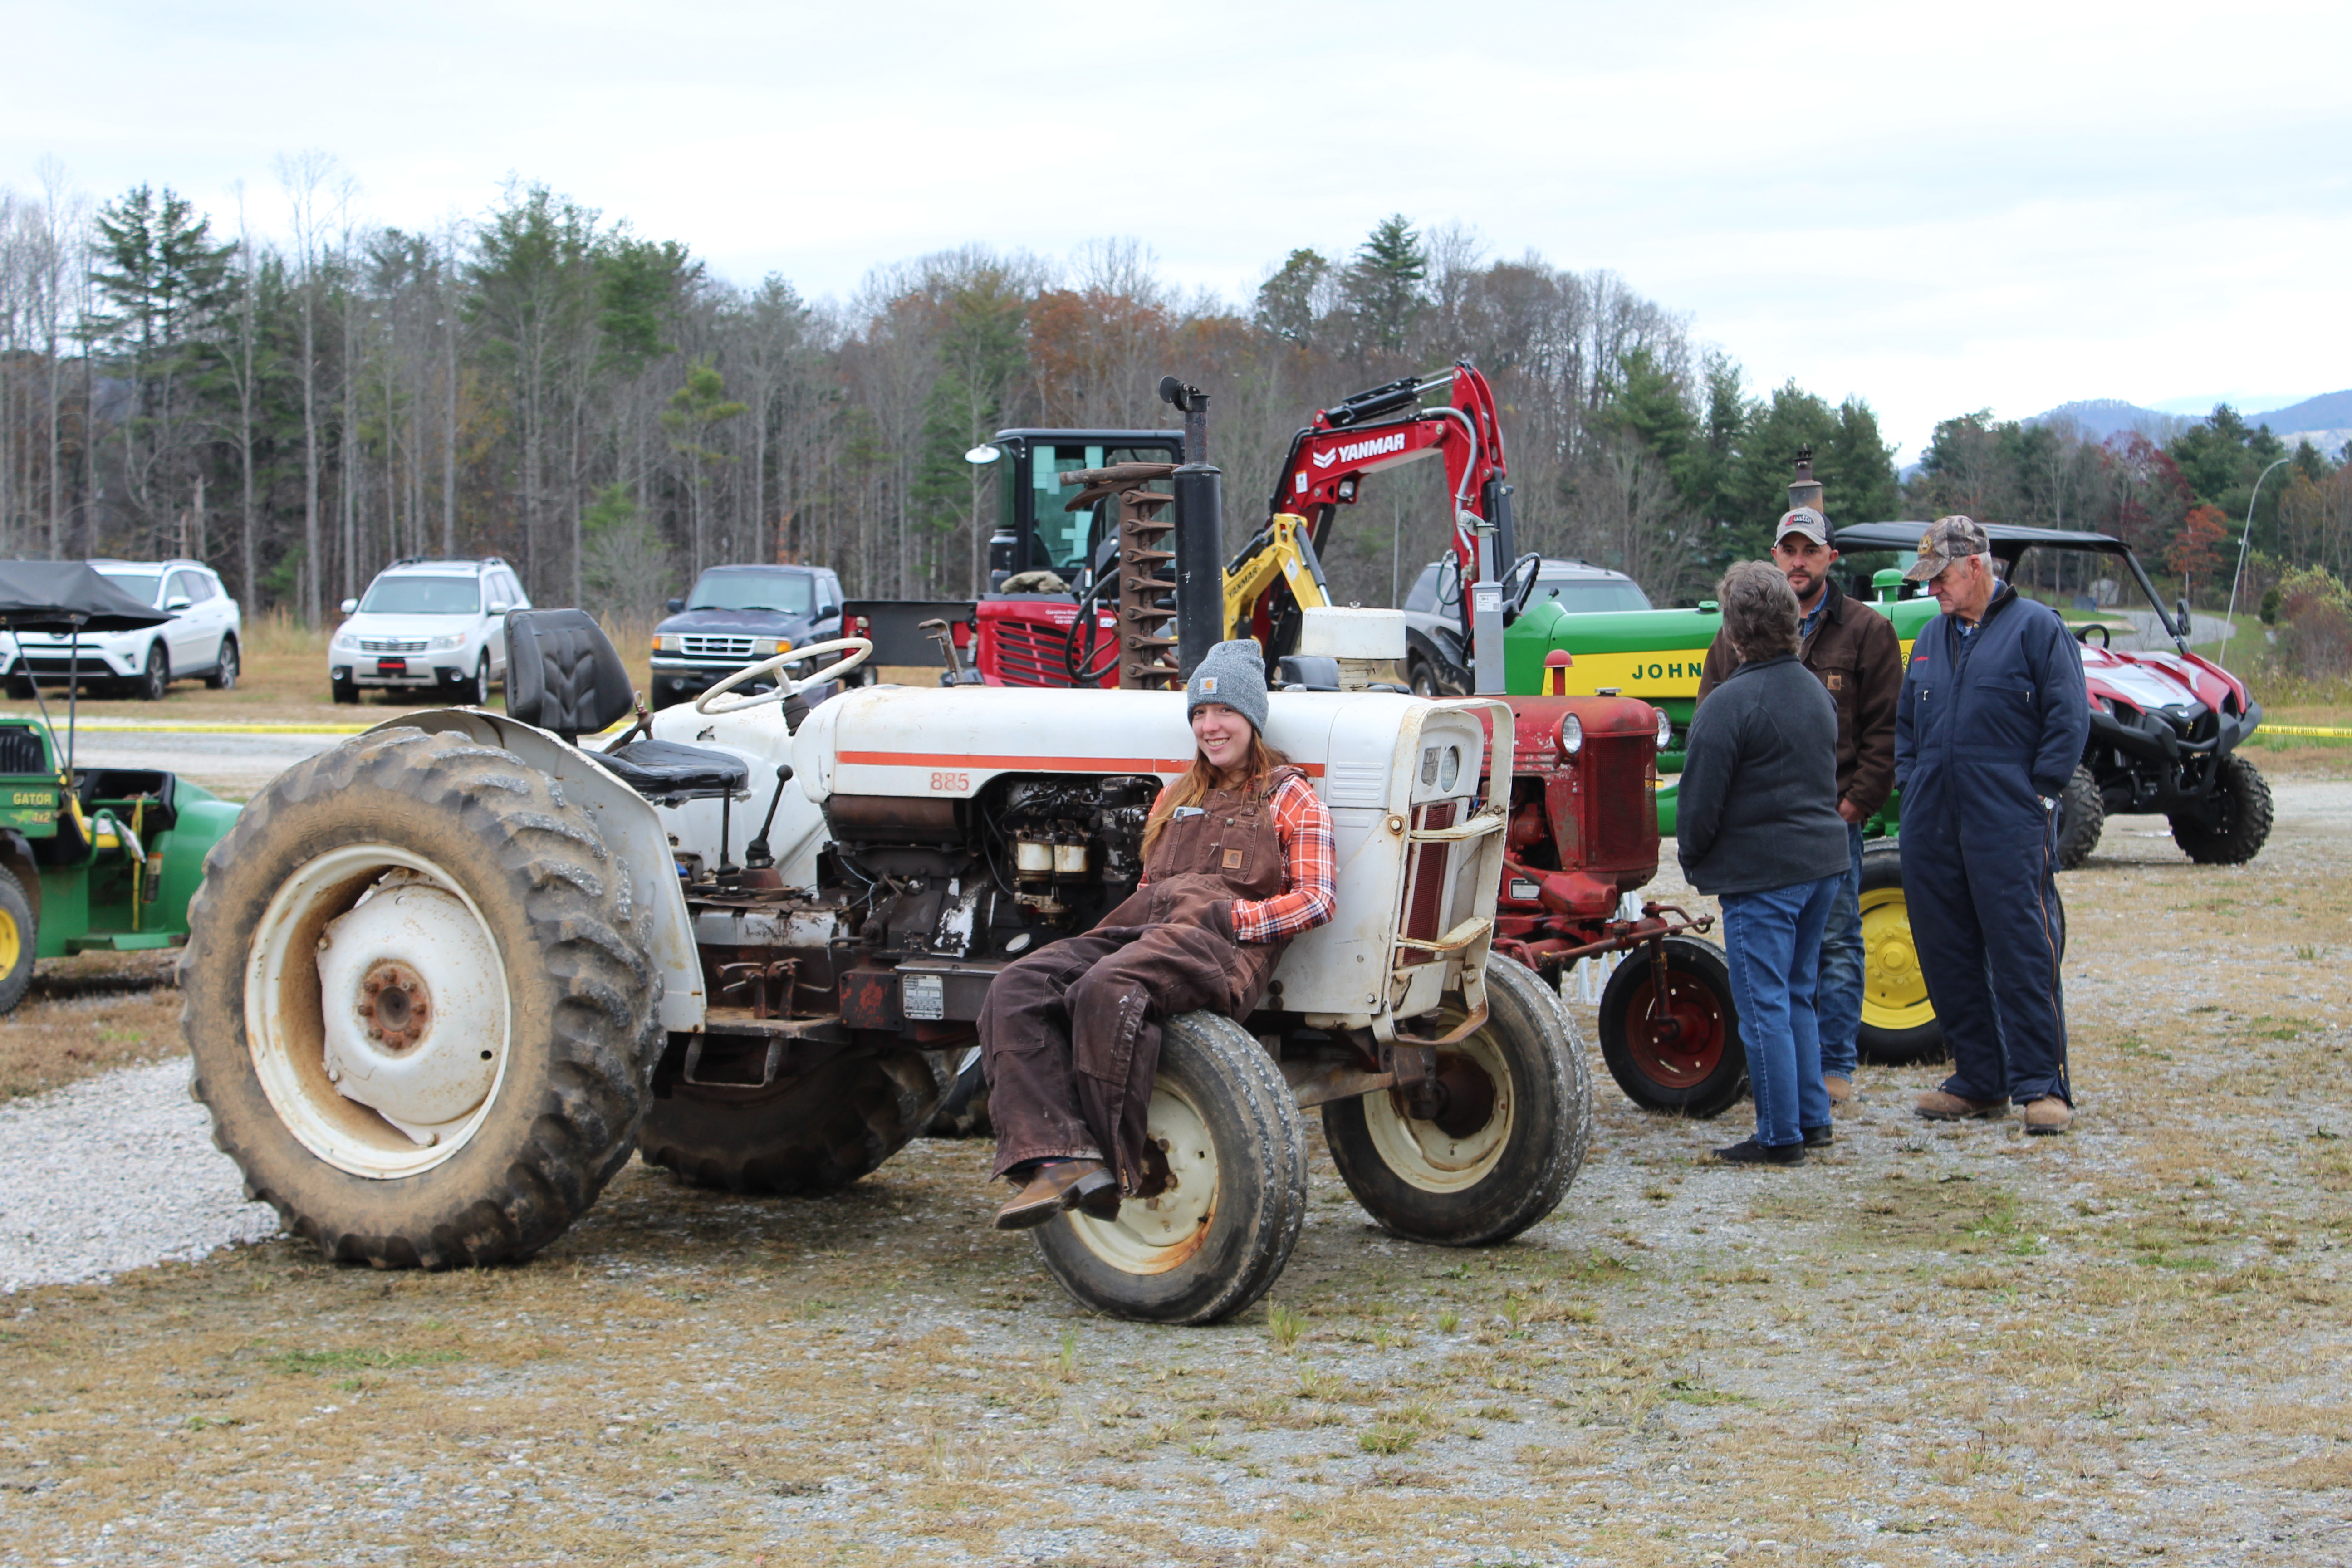 Displays of antique tractors and farm equipment sit ready for attendees of the second annual Remember When Day to view. The festival also featured vendors and live music.  (MNJ photo/Juliana Walker)